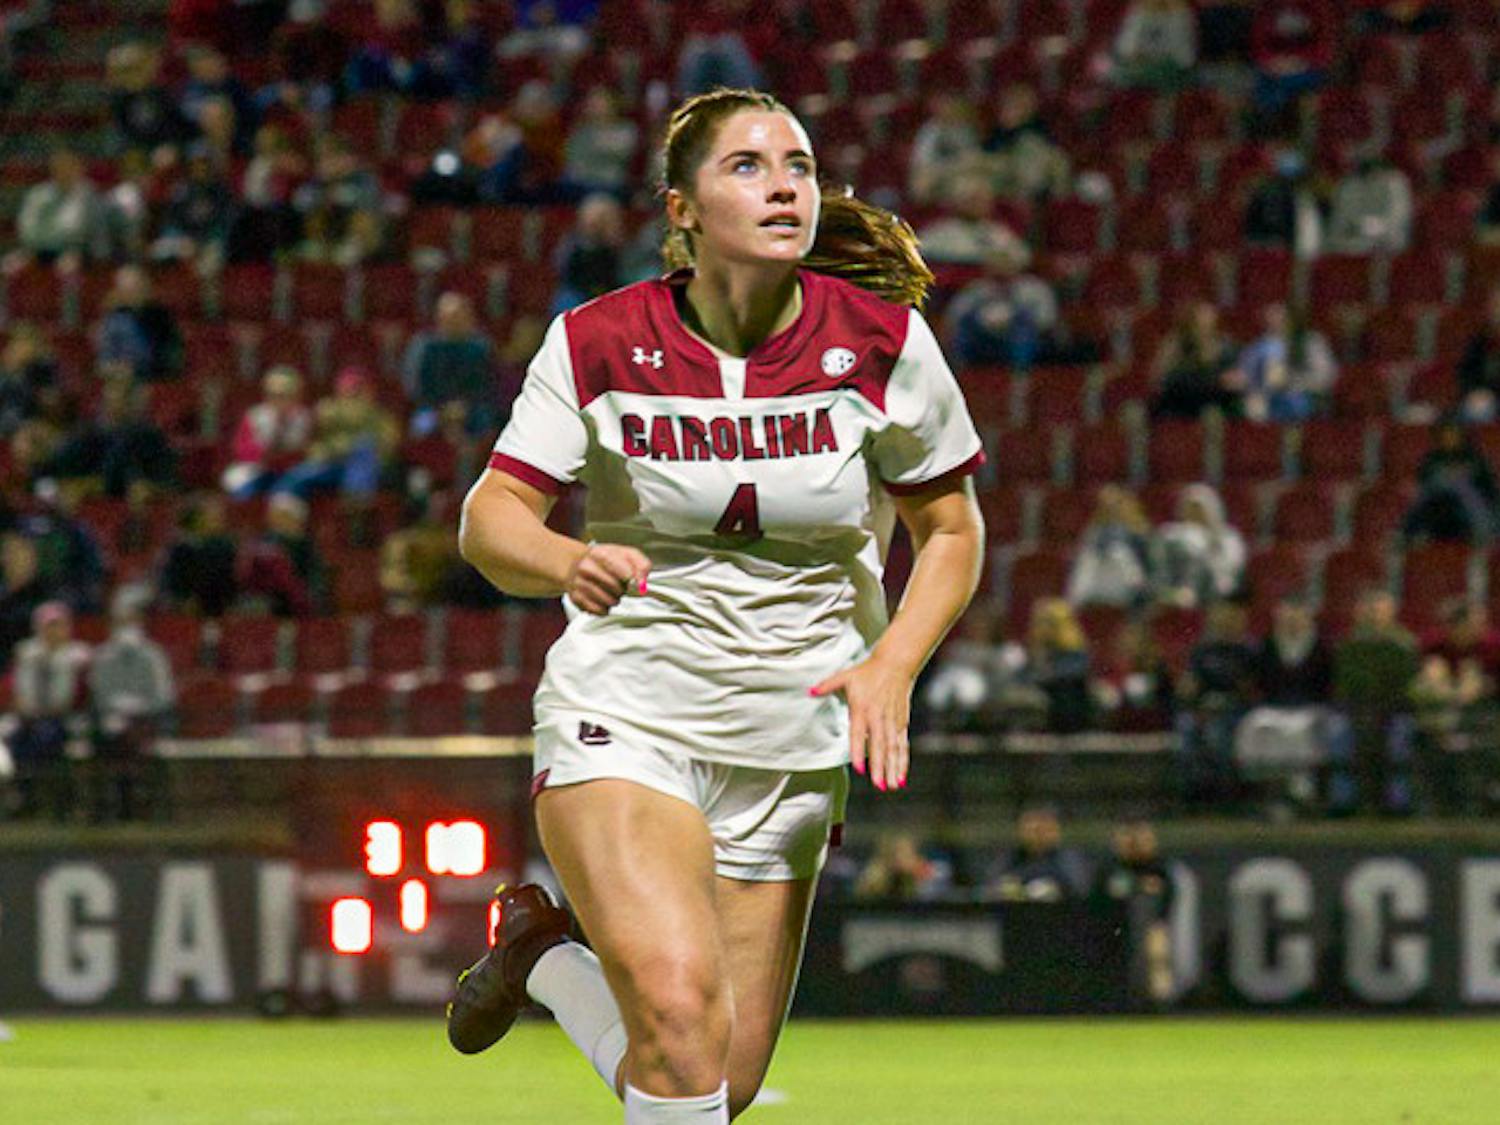 Freshman forward Shae O’Rourke watches as the ball drops onto the field during a matchup with Texas A&amp;M on Oct. 20, 2022. The Gamecocks tied with the Aggies 1-1.